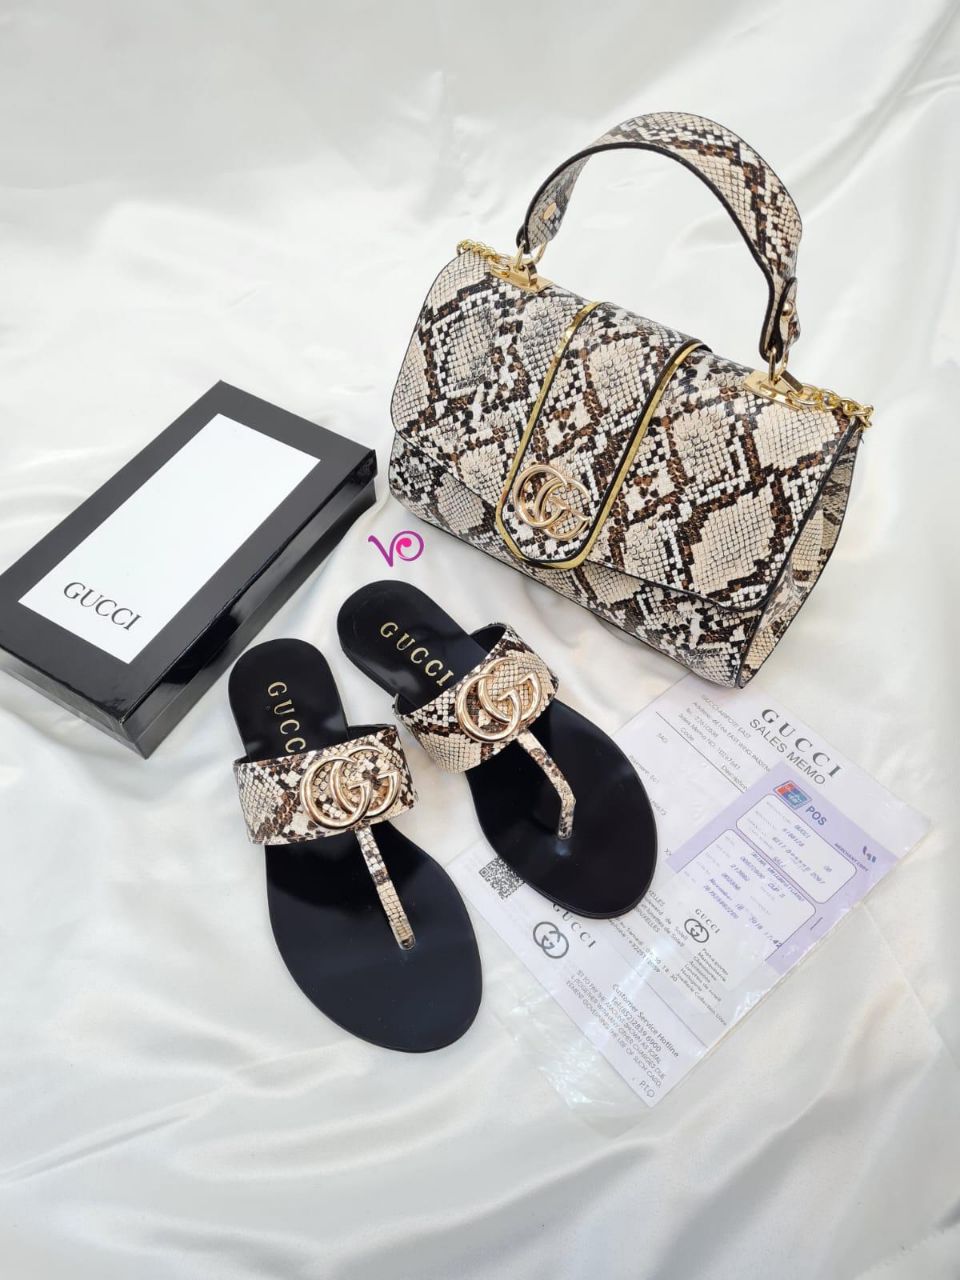 Gucci leather thong sandals with handbag